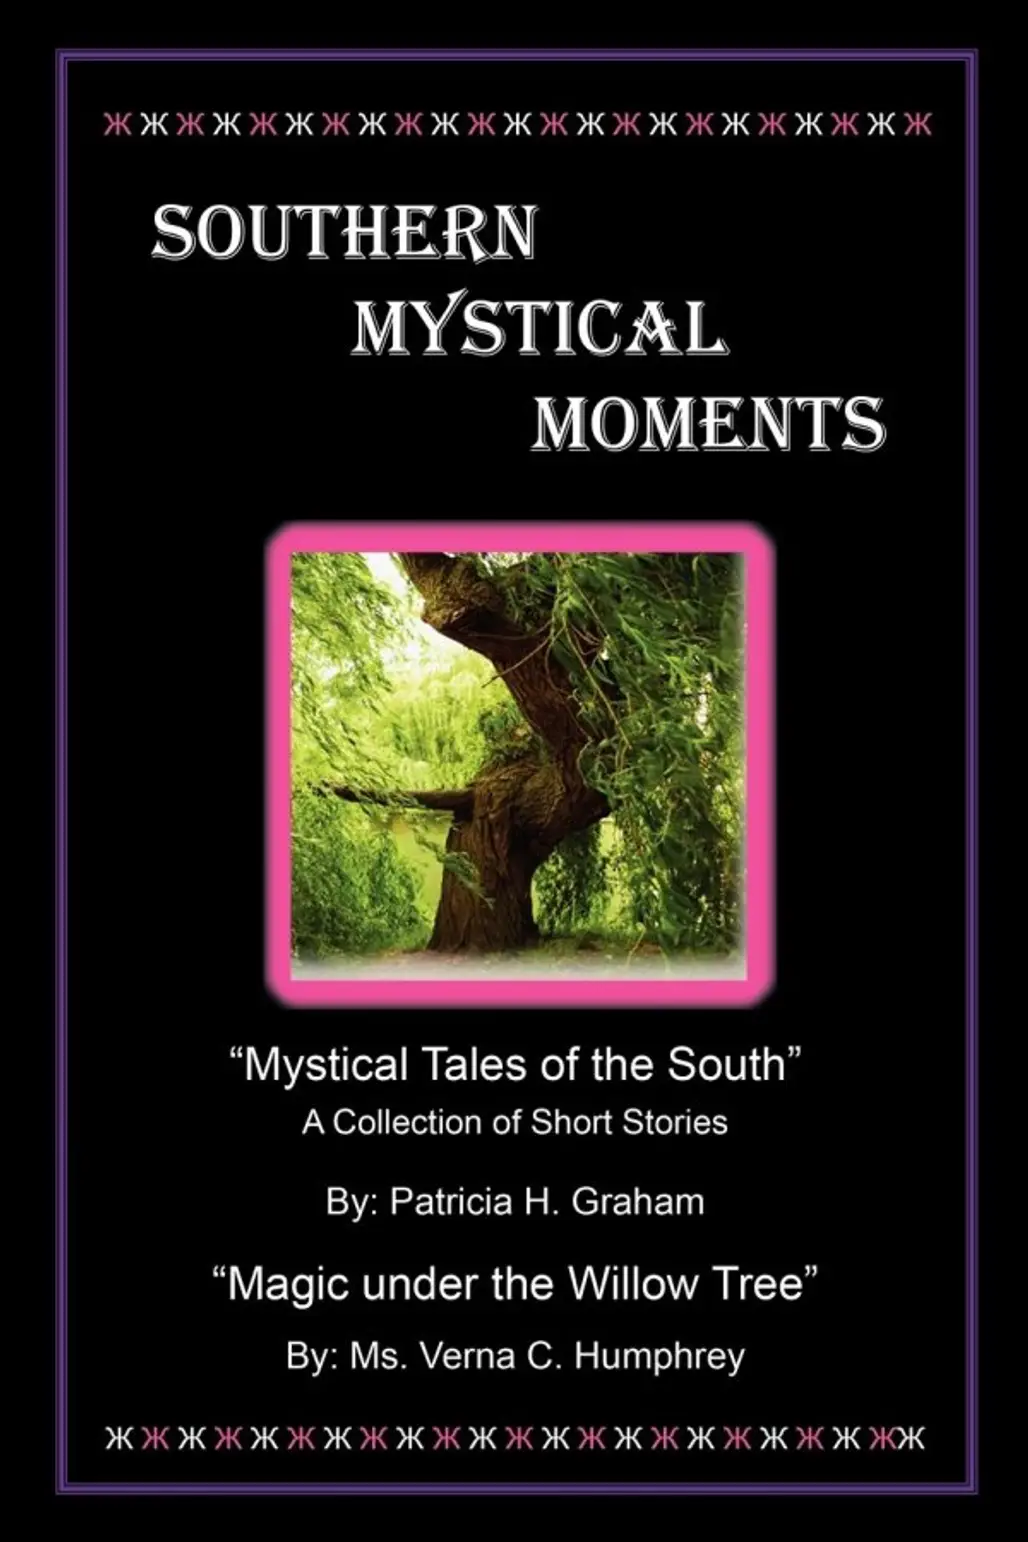 Southern Mystical Moments by Patricia H. Graham